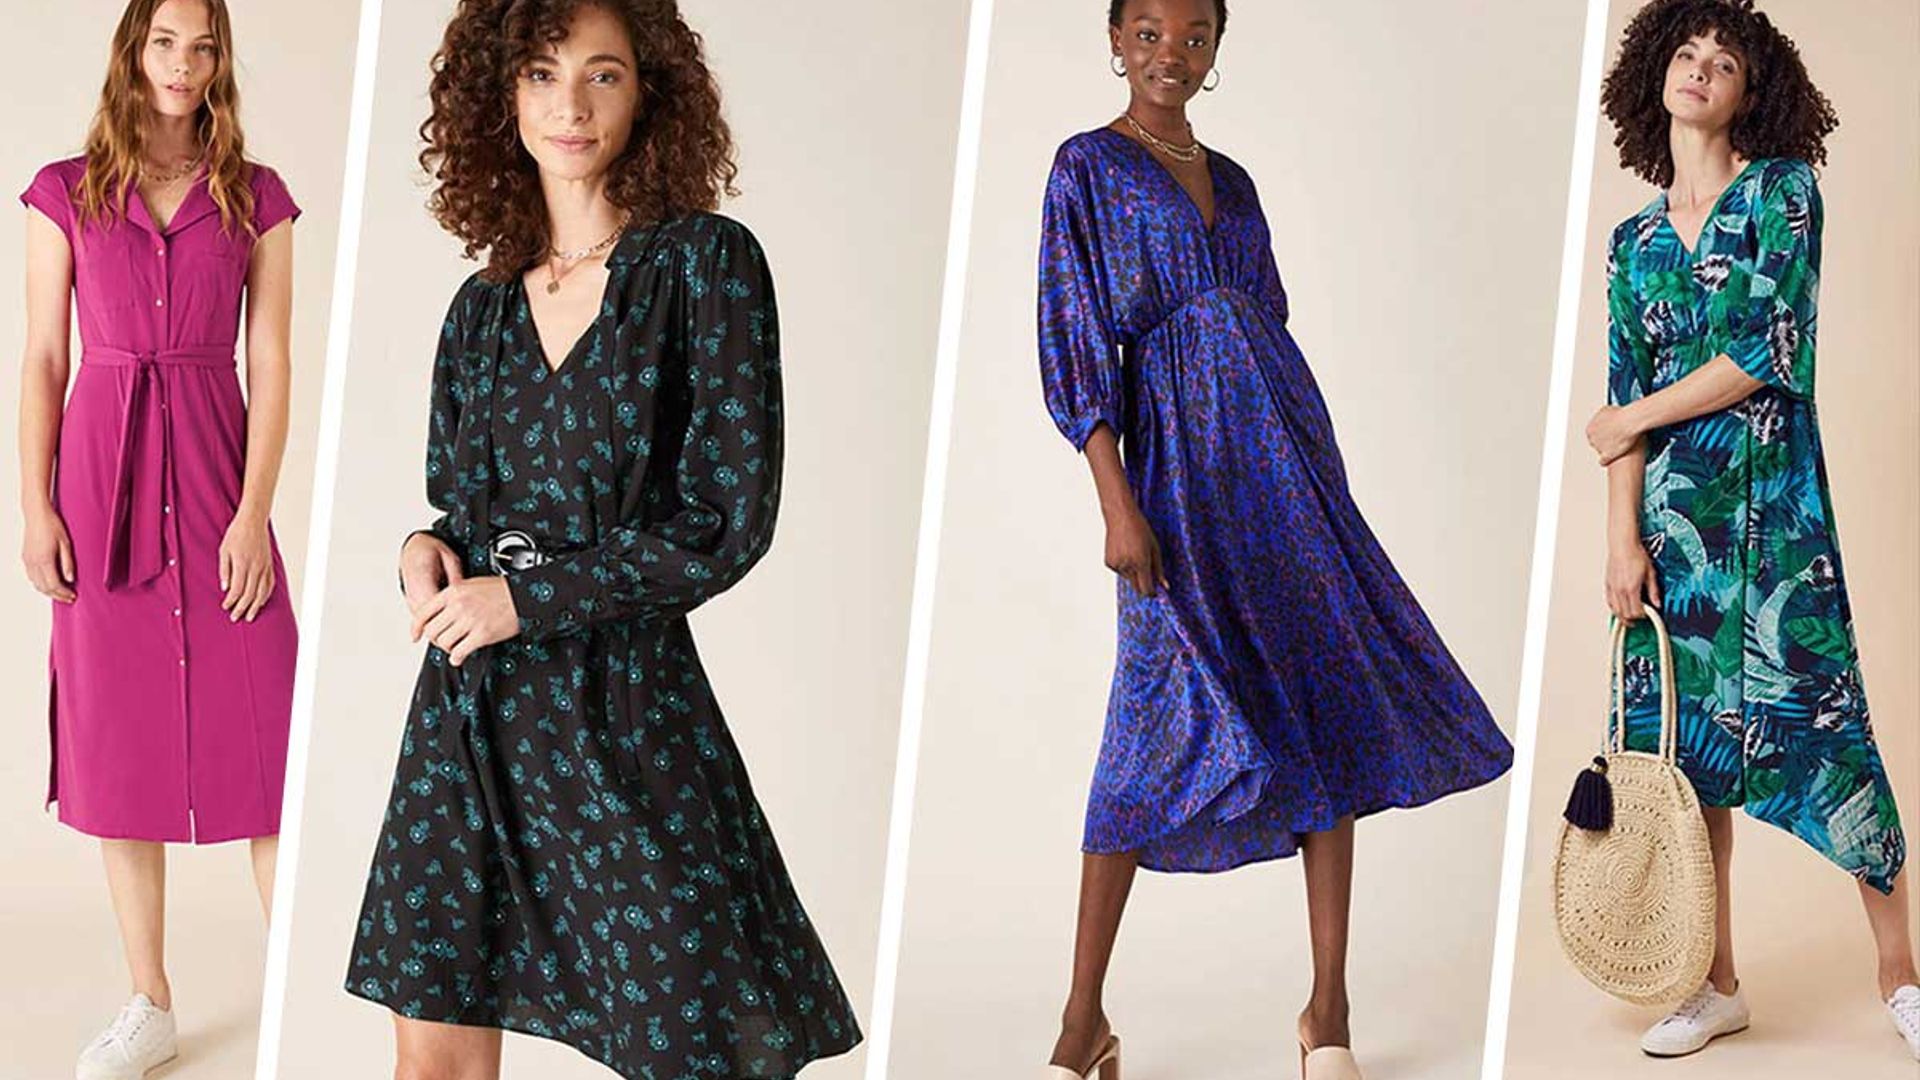 Monsoon is selling the dreamiest dresses for £20 and under! Yes, really ...